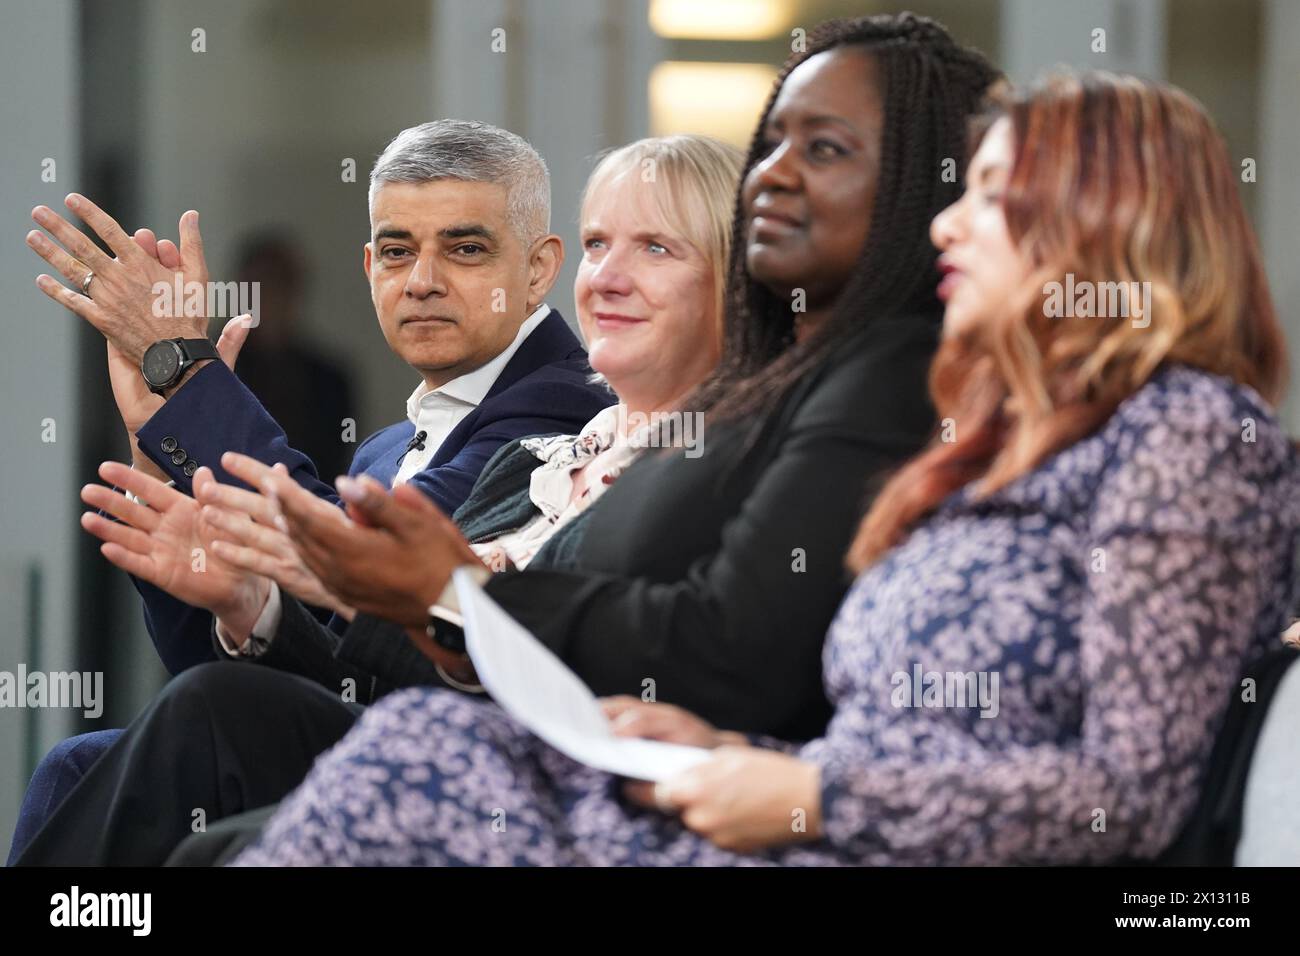 Mayor of London Sadiq Khan waits to make his speech during a visit to St John's Church in Waterloo, south London, as he has pledged to wipe out rough sleeping in the capital by 2030 if he is re-elected as London mayor on May 2. Some £10 million - the biggest single intervention to tackle rough sleeping from City Hall on record - would be used to fund an expanded network of 'ending homelessness hubs' under the plans. The hubs are designed to help an extra 1,700 rough sleepers every year with rapid reassessment and rehousing. Picture date: Monday April 15, 2024. Stock Photo